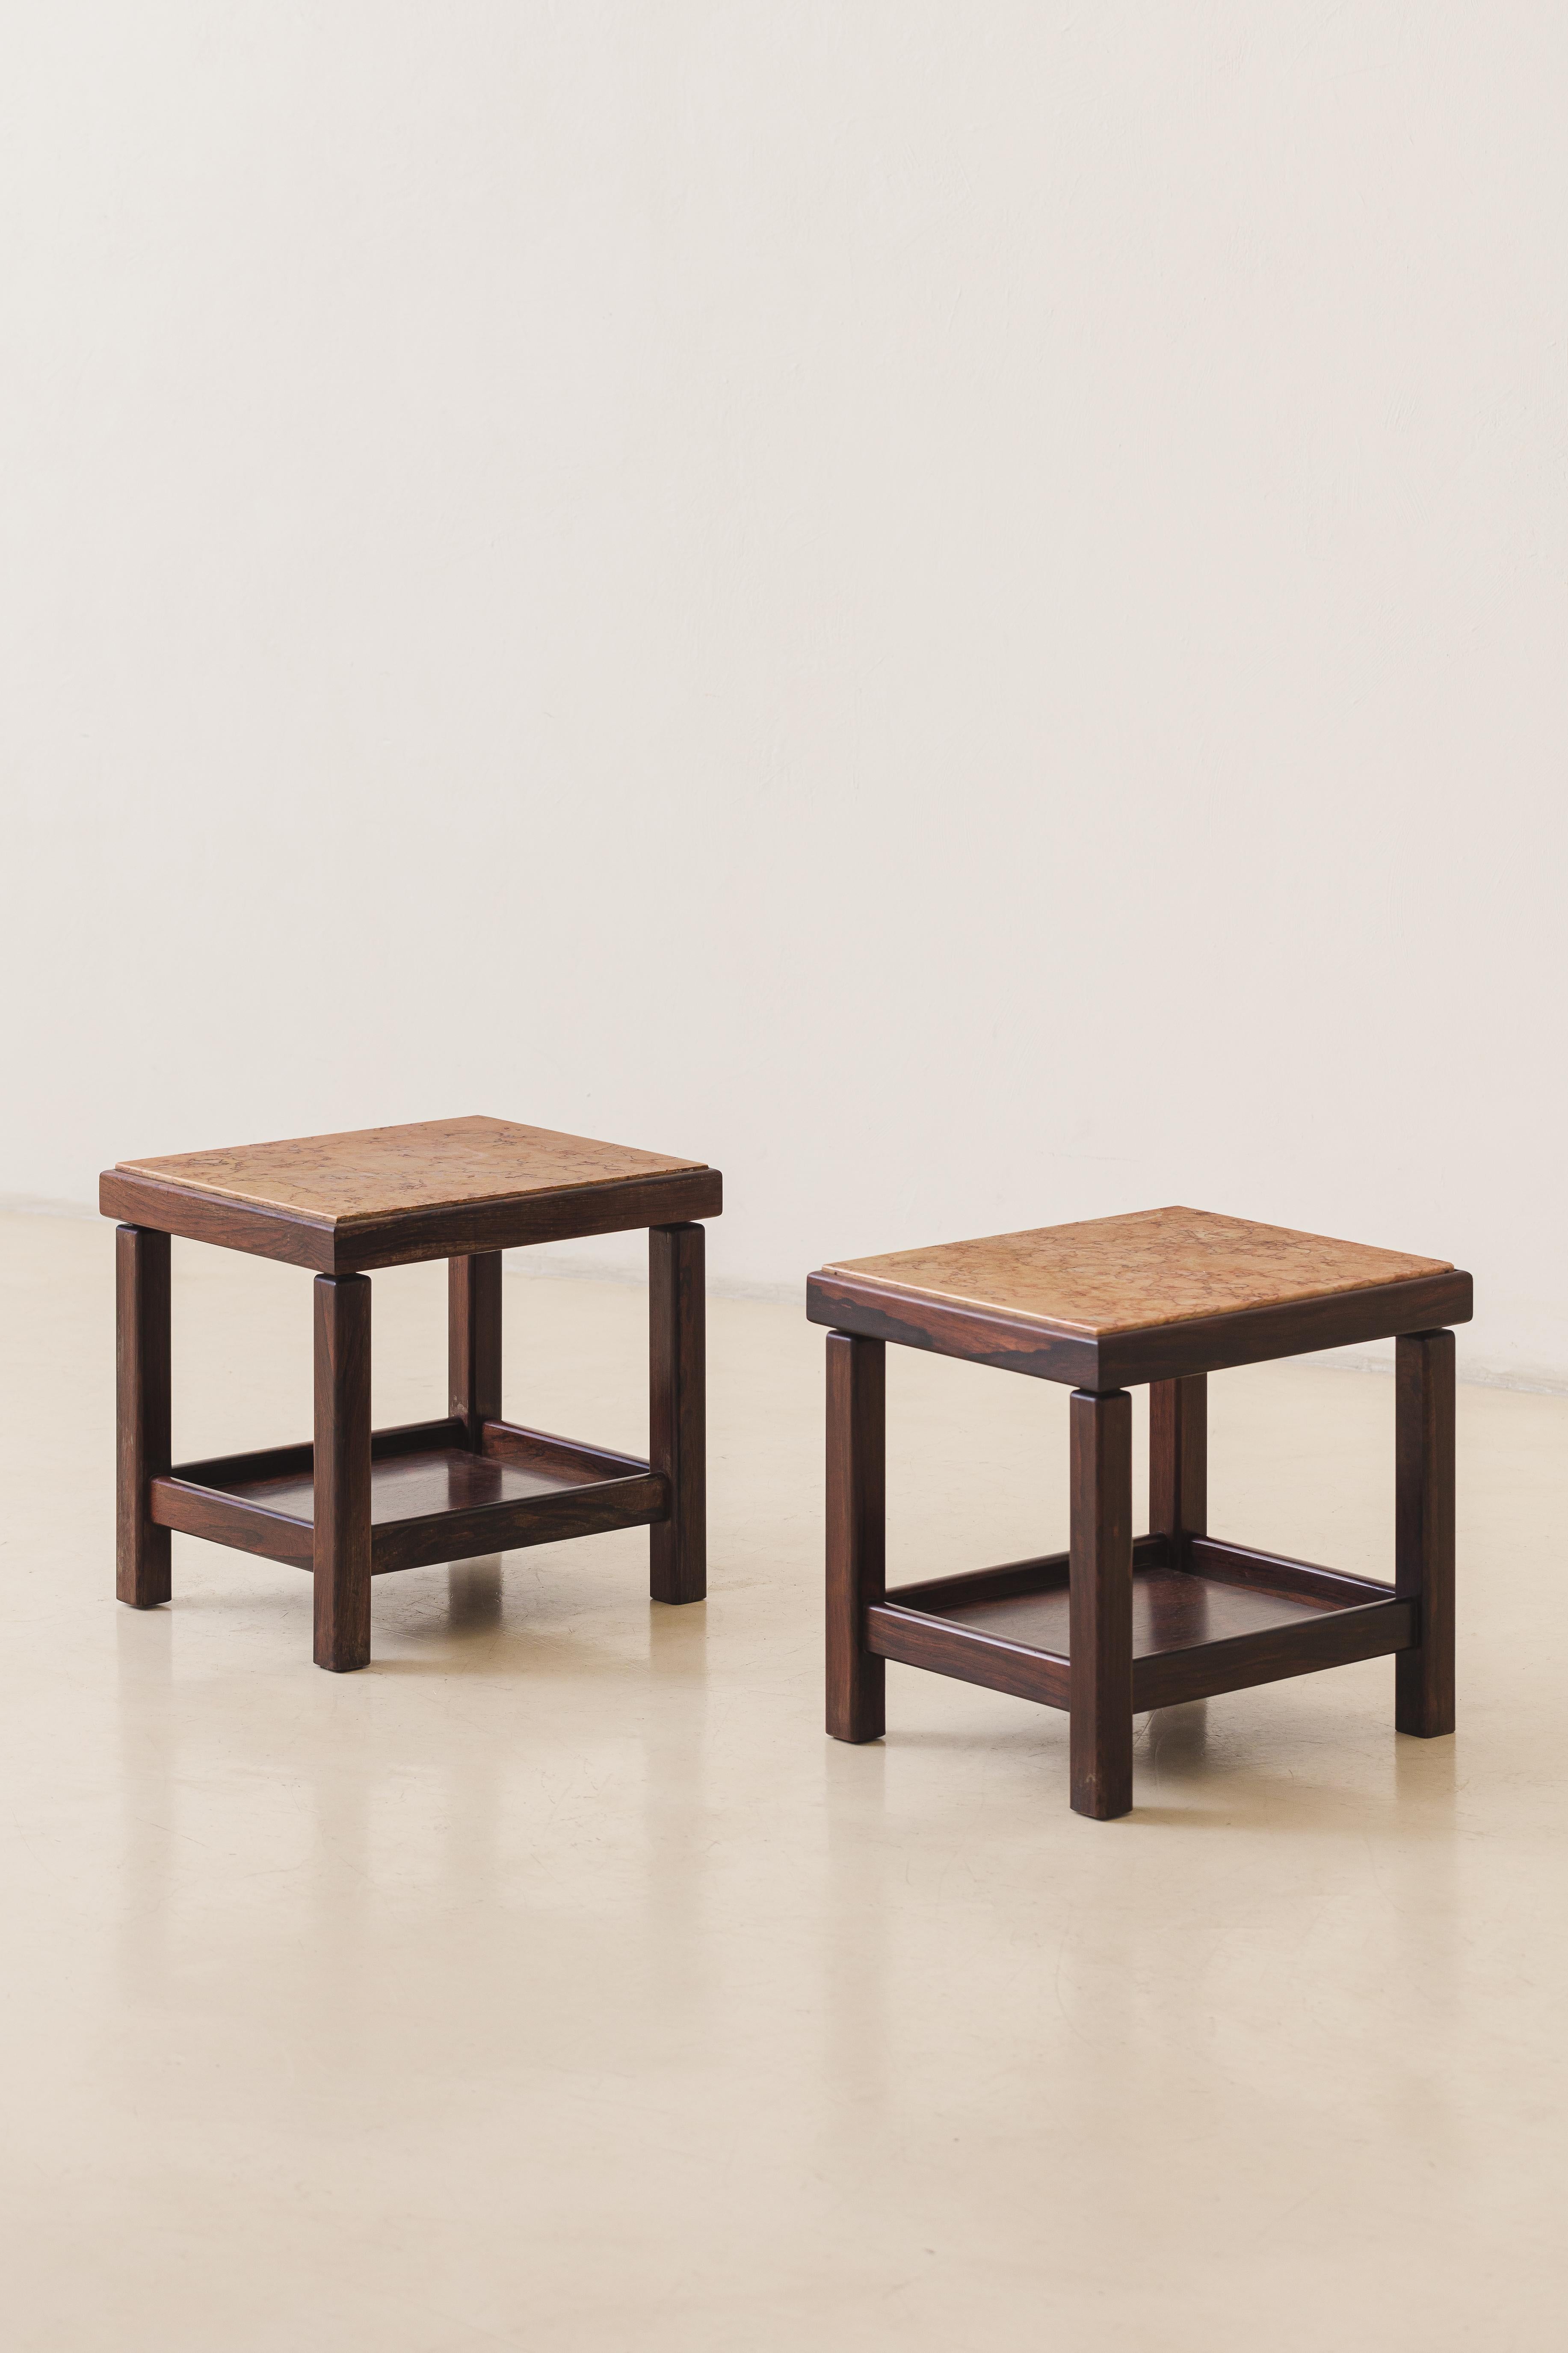 Brazilian Pair of Rosewood and Marble Side Tables, Design by Unknown Artist, Brazil, 1960s For Sale